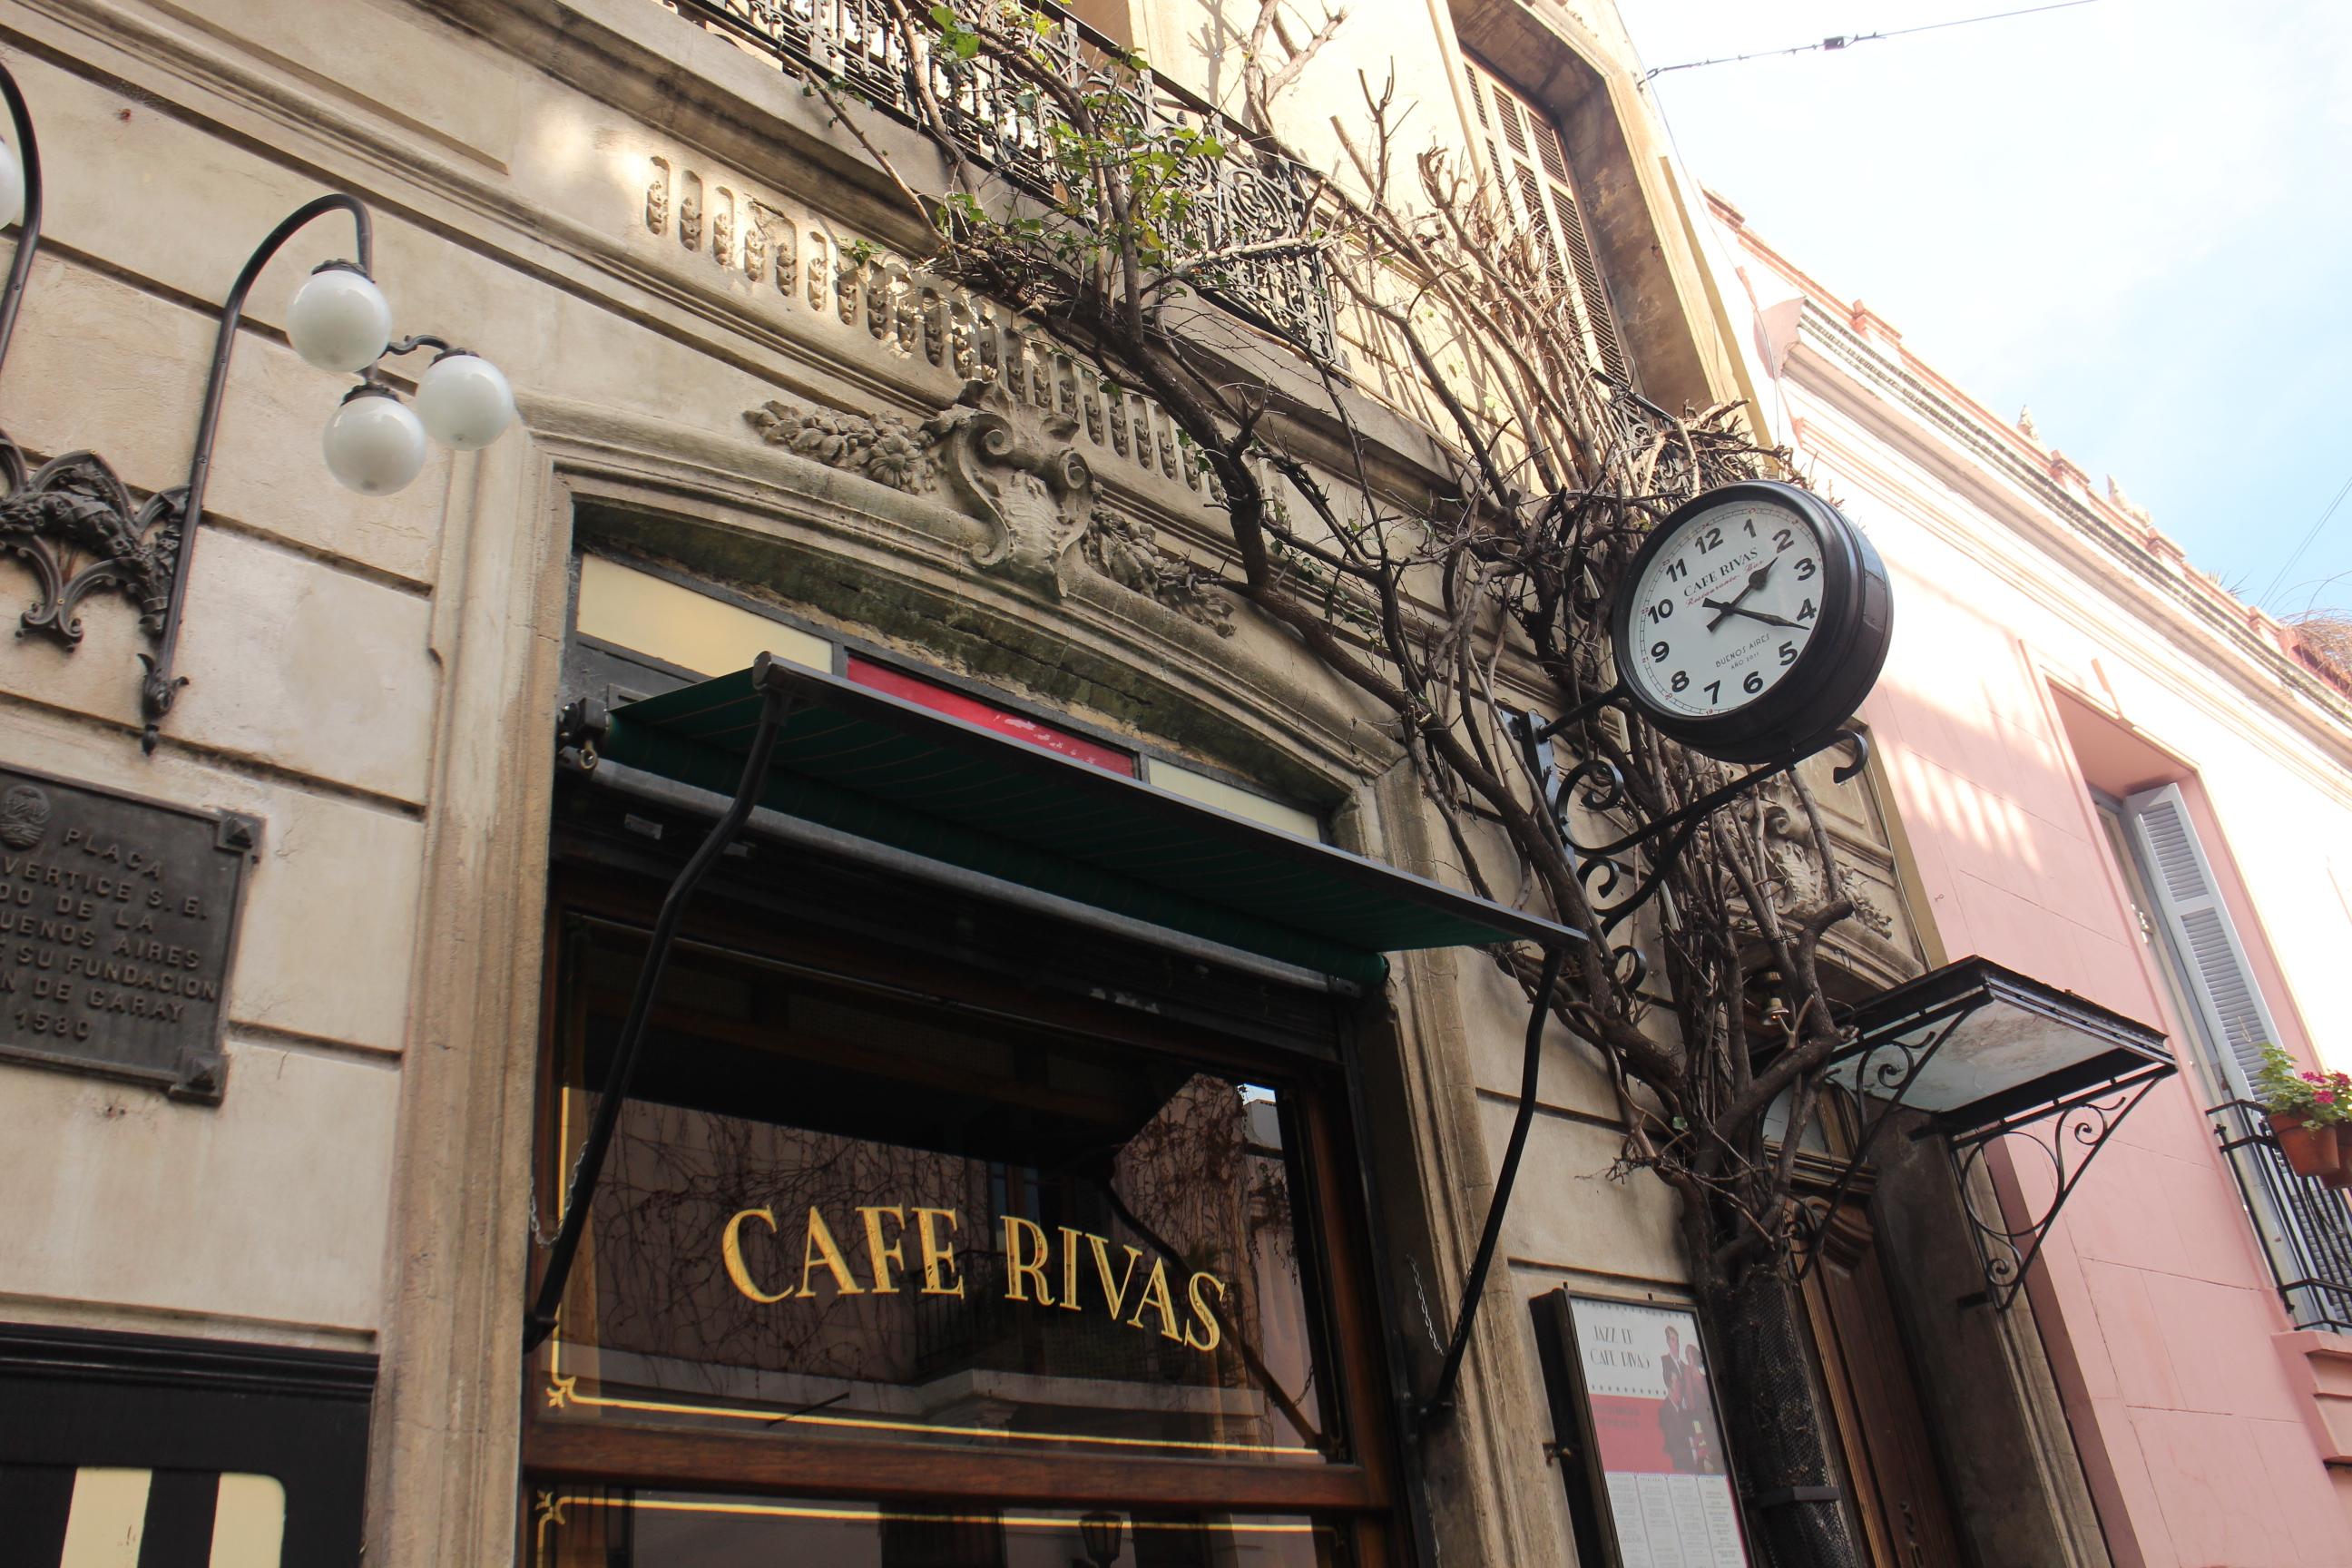 Cover image of this place Cafe Rivas 